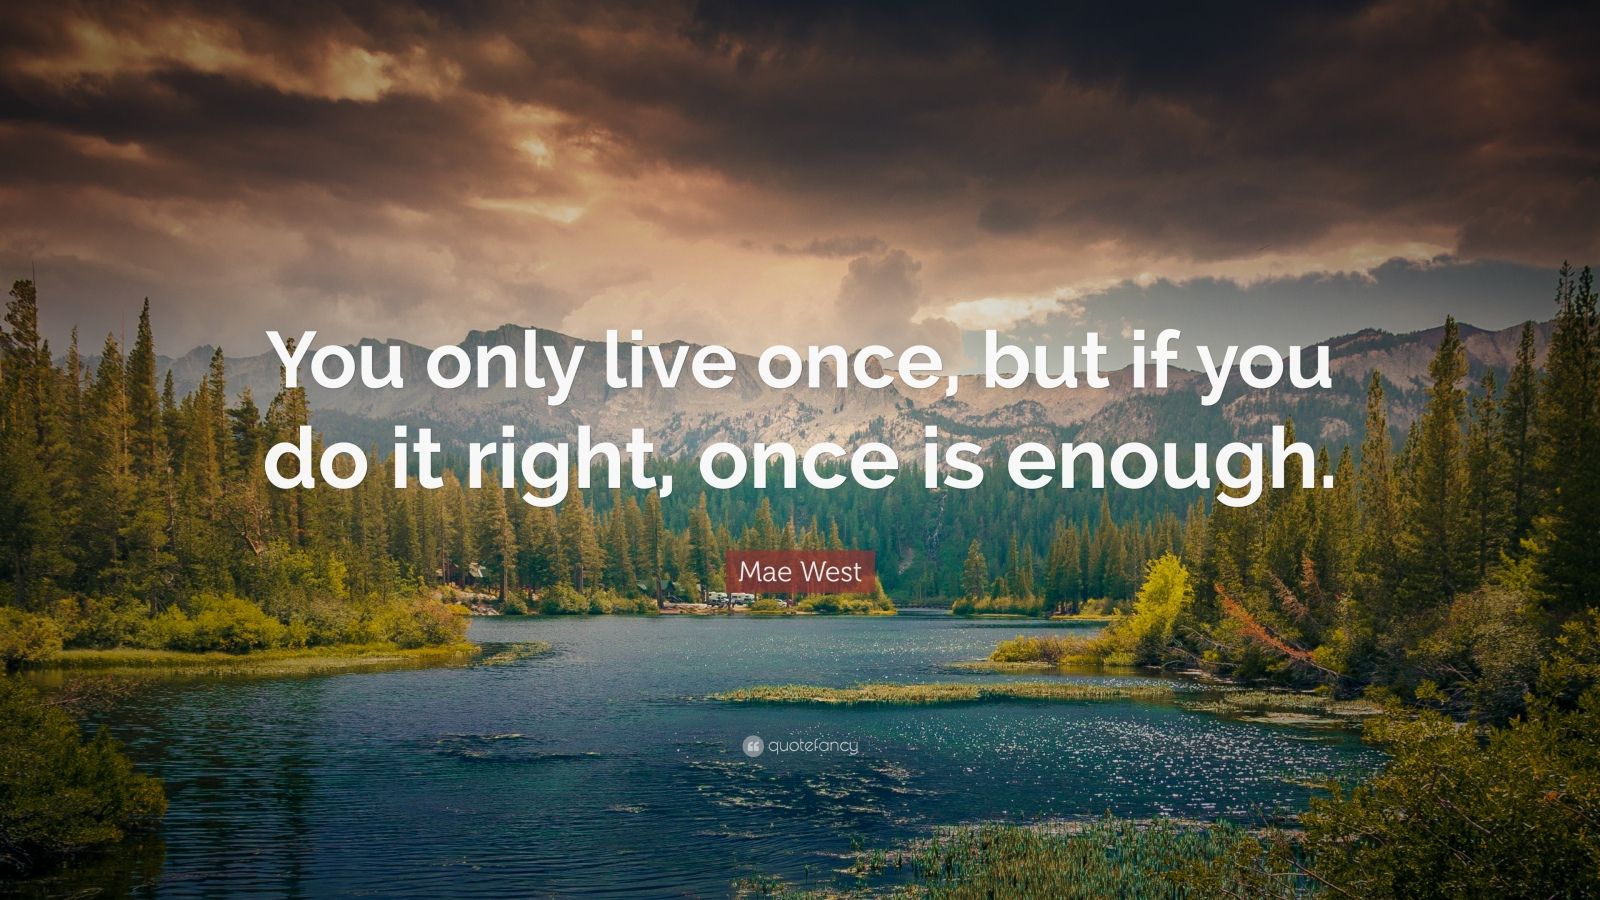 Mae West Quote: “You only live once, but if you do it right, once is